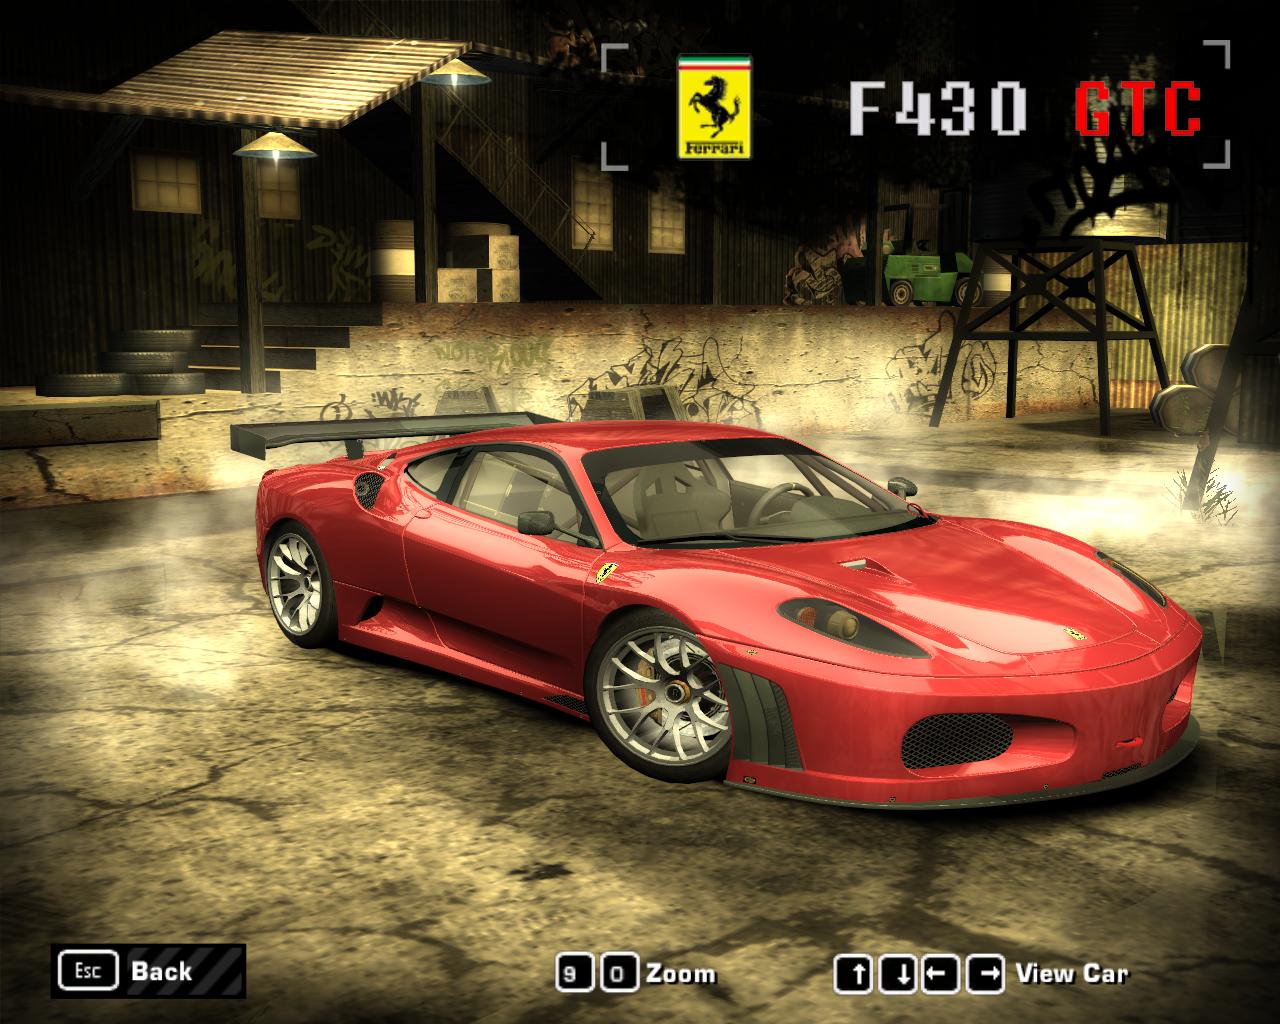 Need For Speed Most Wanted Ferrari F430 GTC (NFS:Shift)